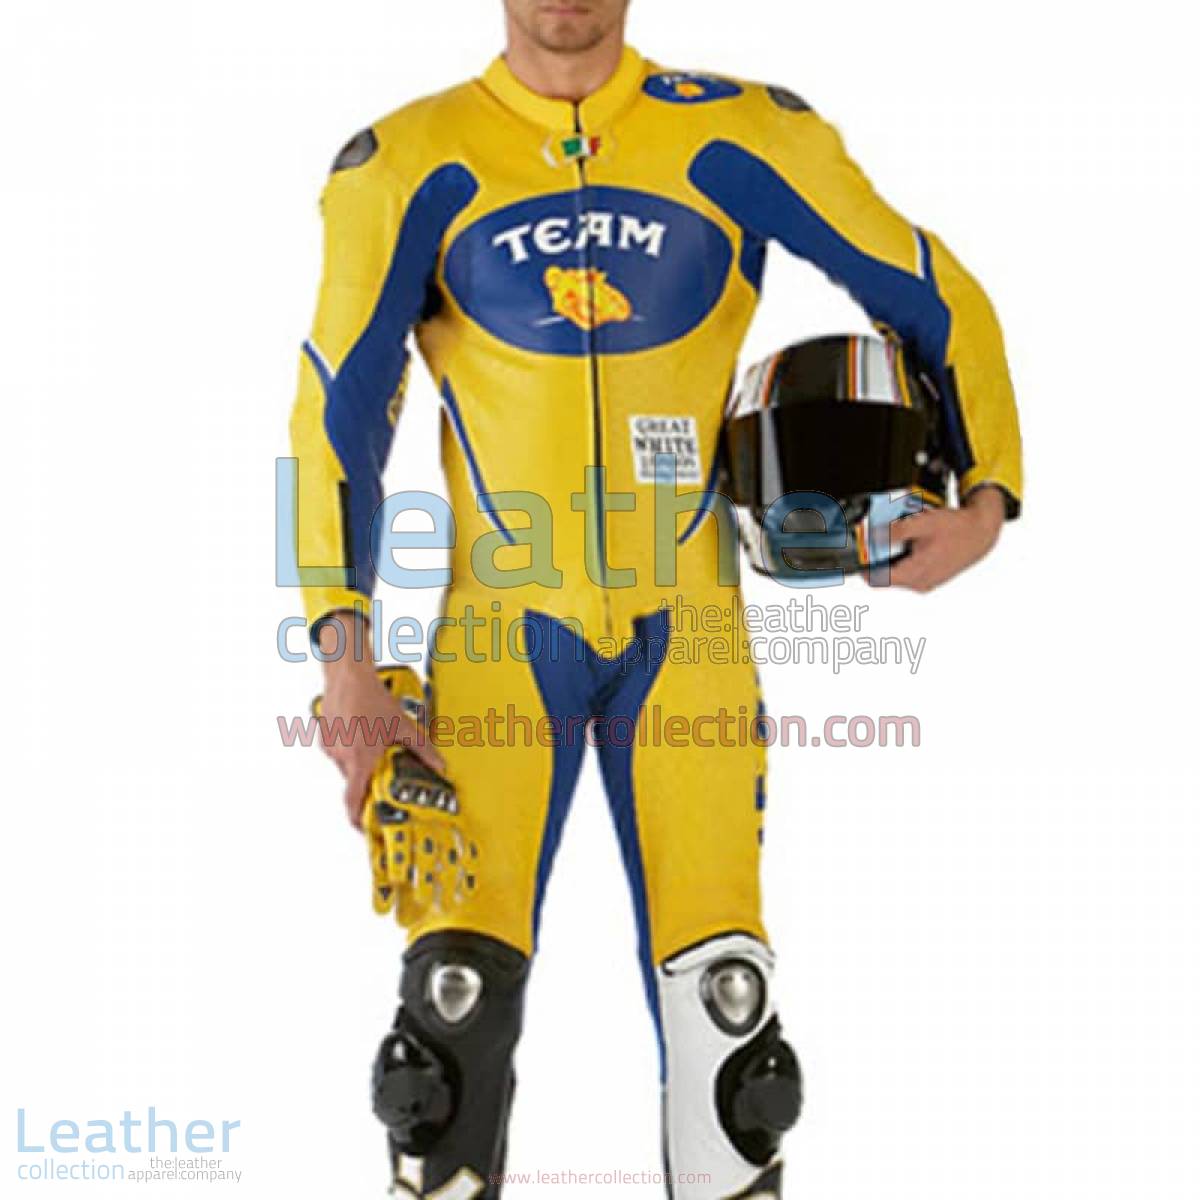 VR46 Team Motorcycle Racing Leather Suit | valentino rossi clothing,motorcycle racing suit